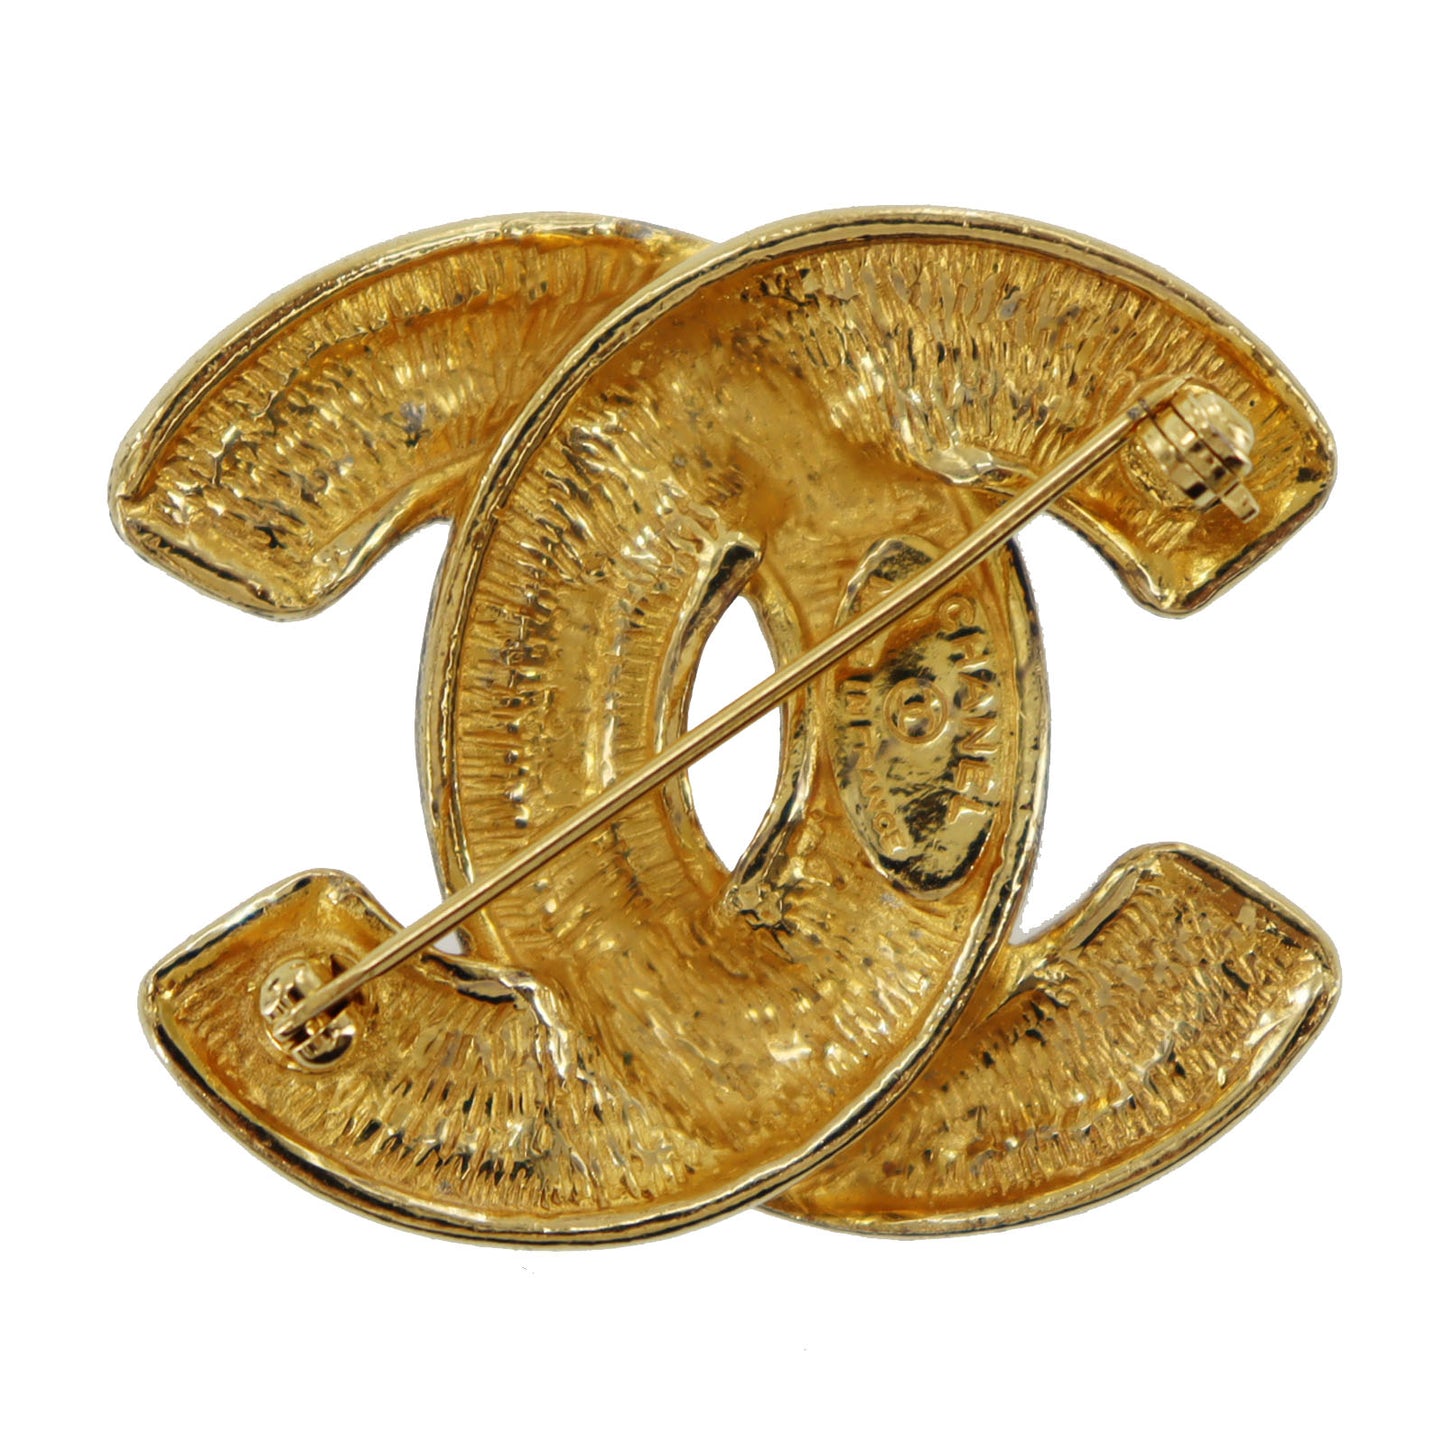 CHANEL CC Logos Matelasse Pin Brooch Gold Plated 1152 #AG307